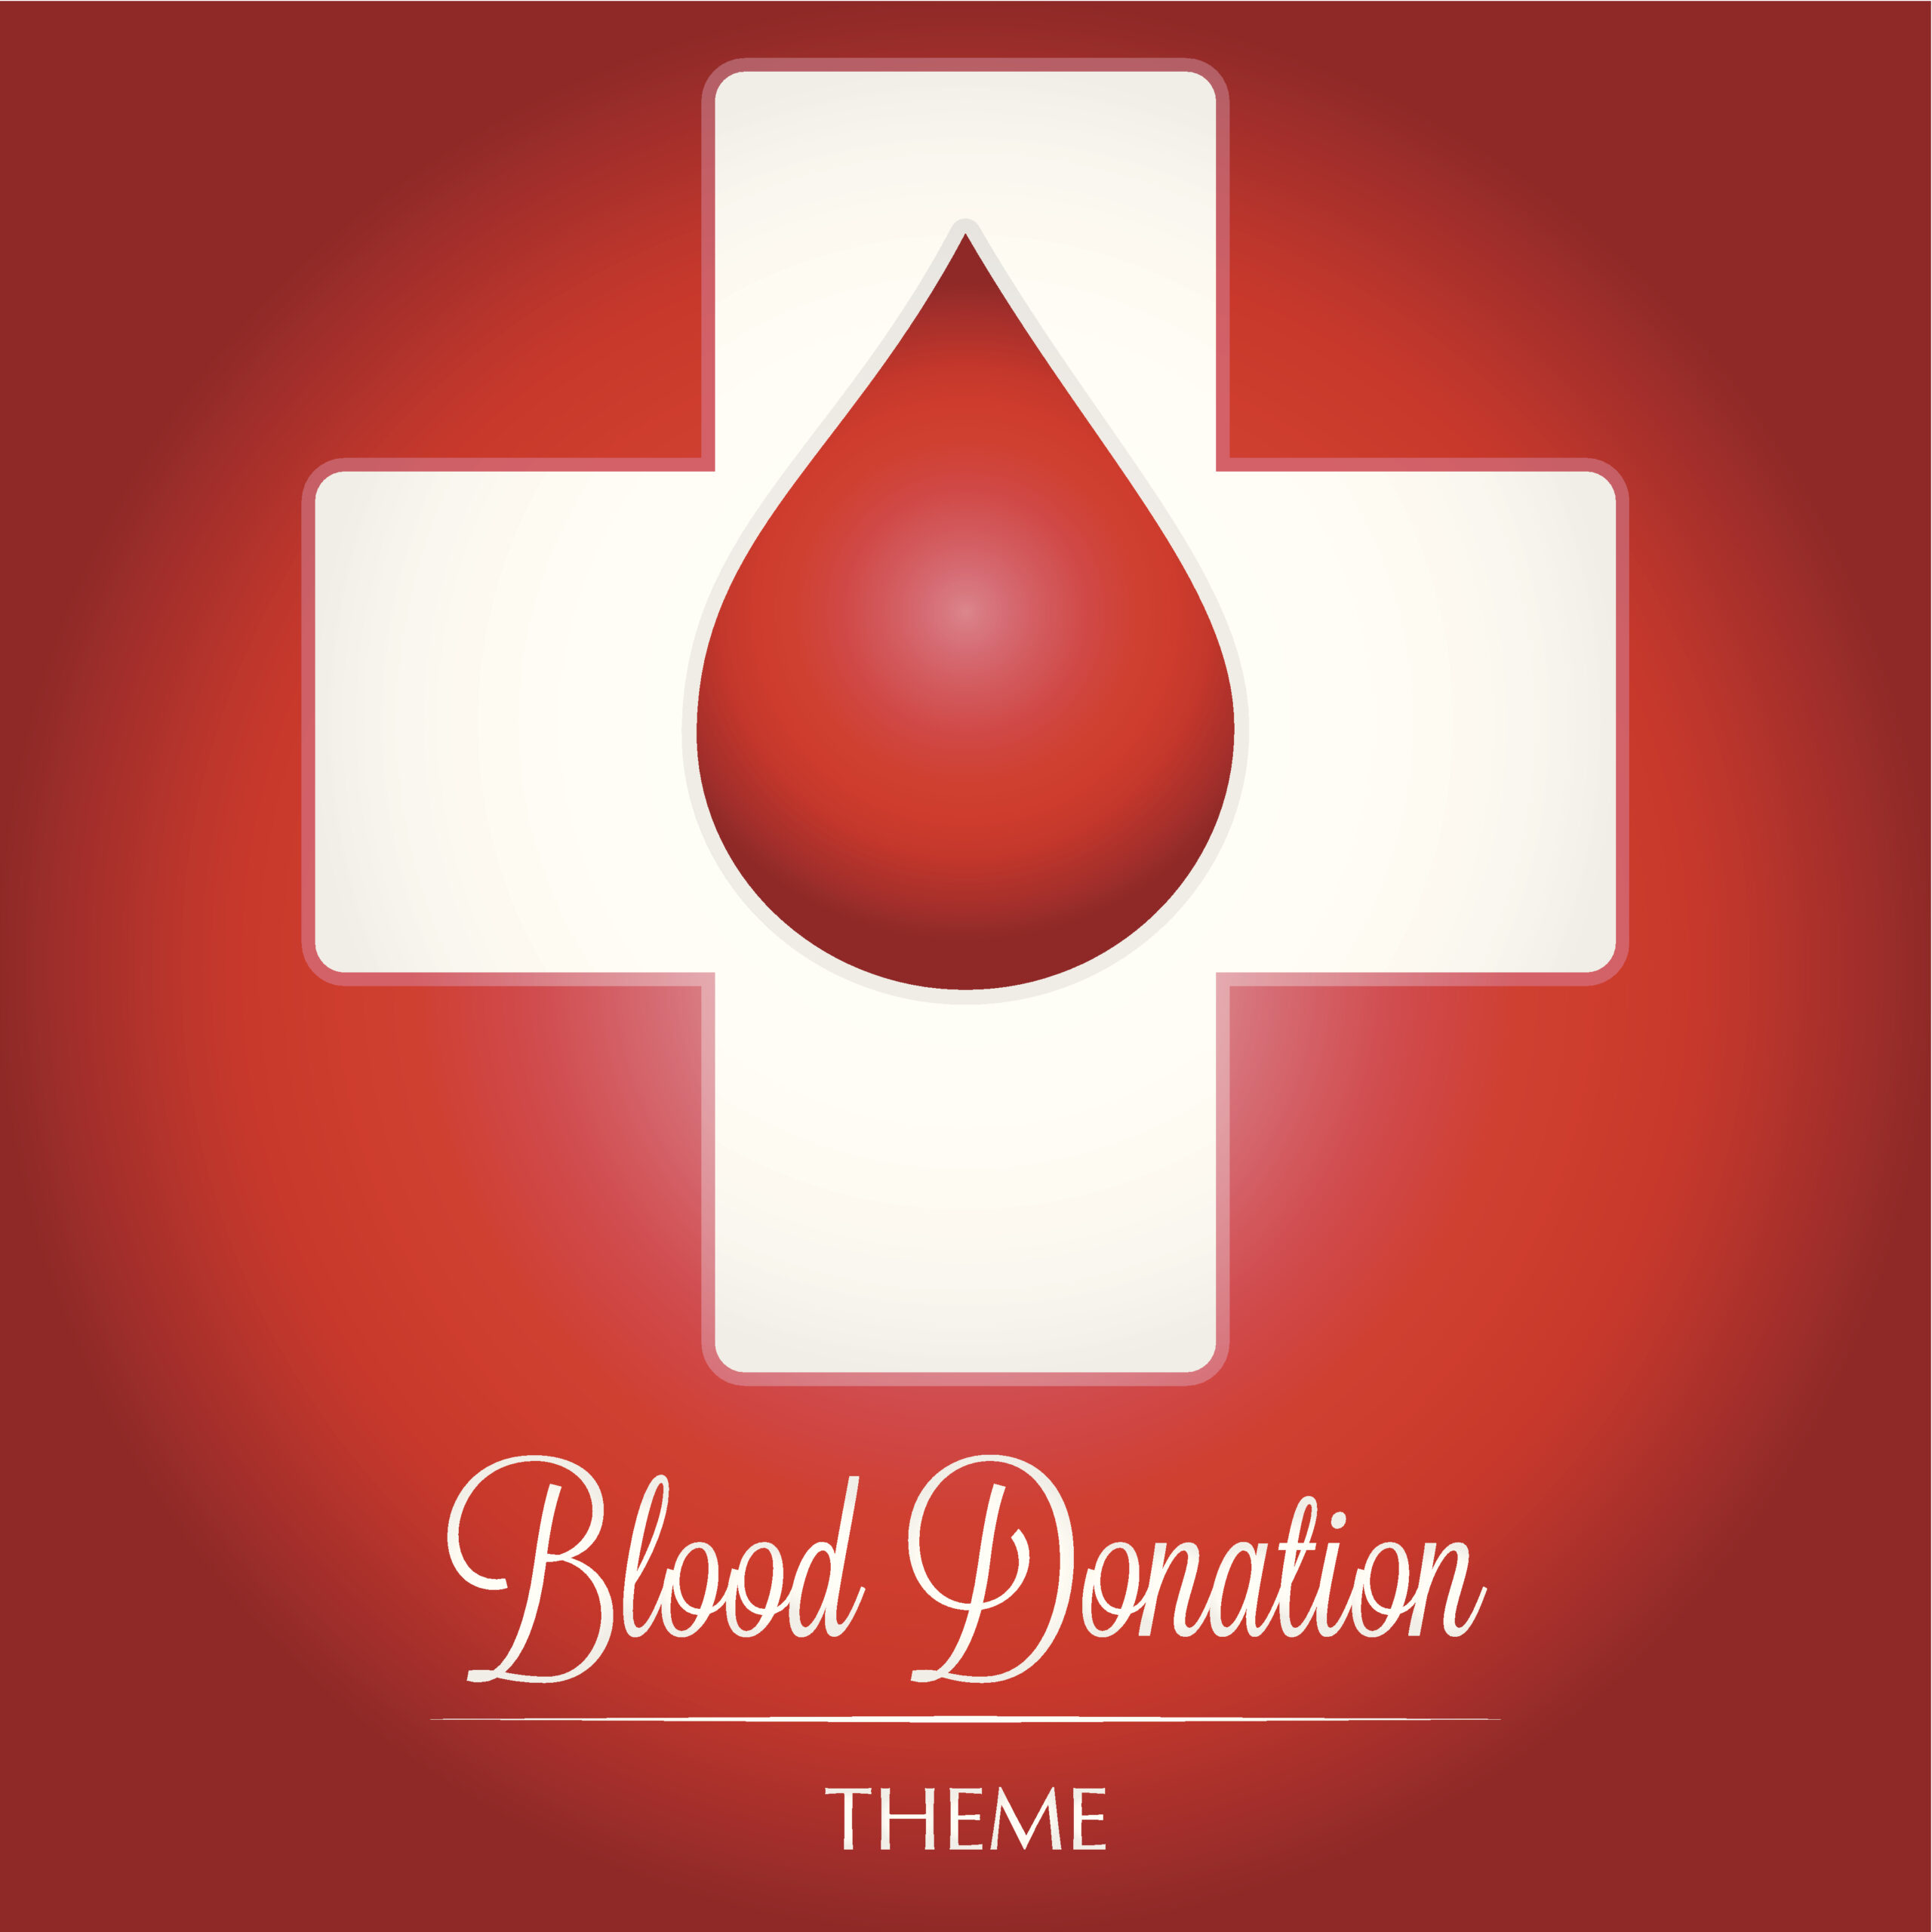 <h1 class="tribe-events-single-event-title">Grinnell Community Blood Drive</h1>